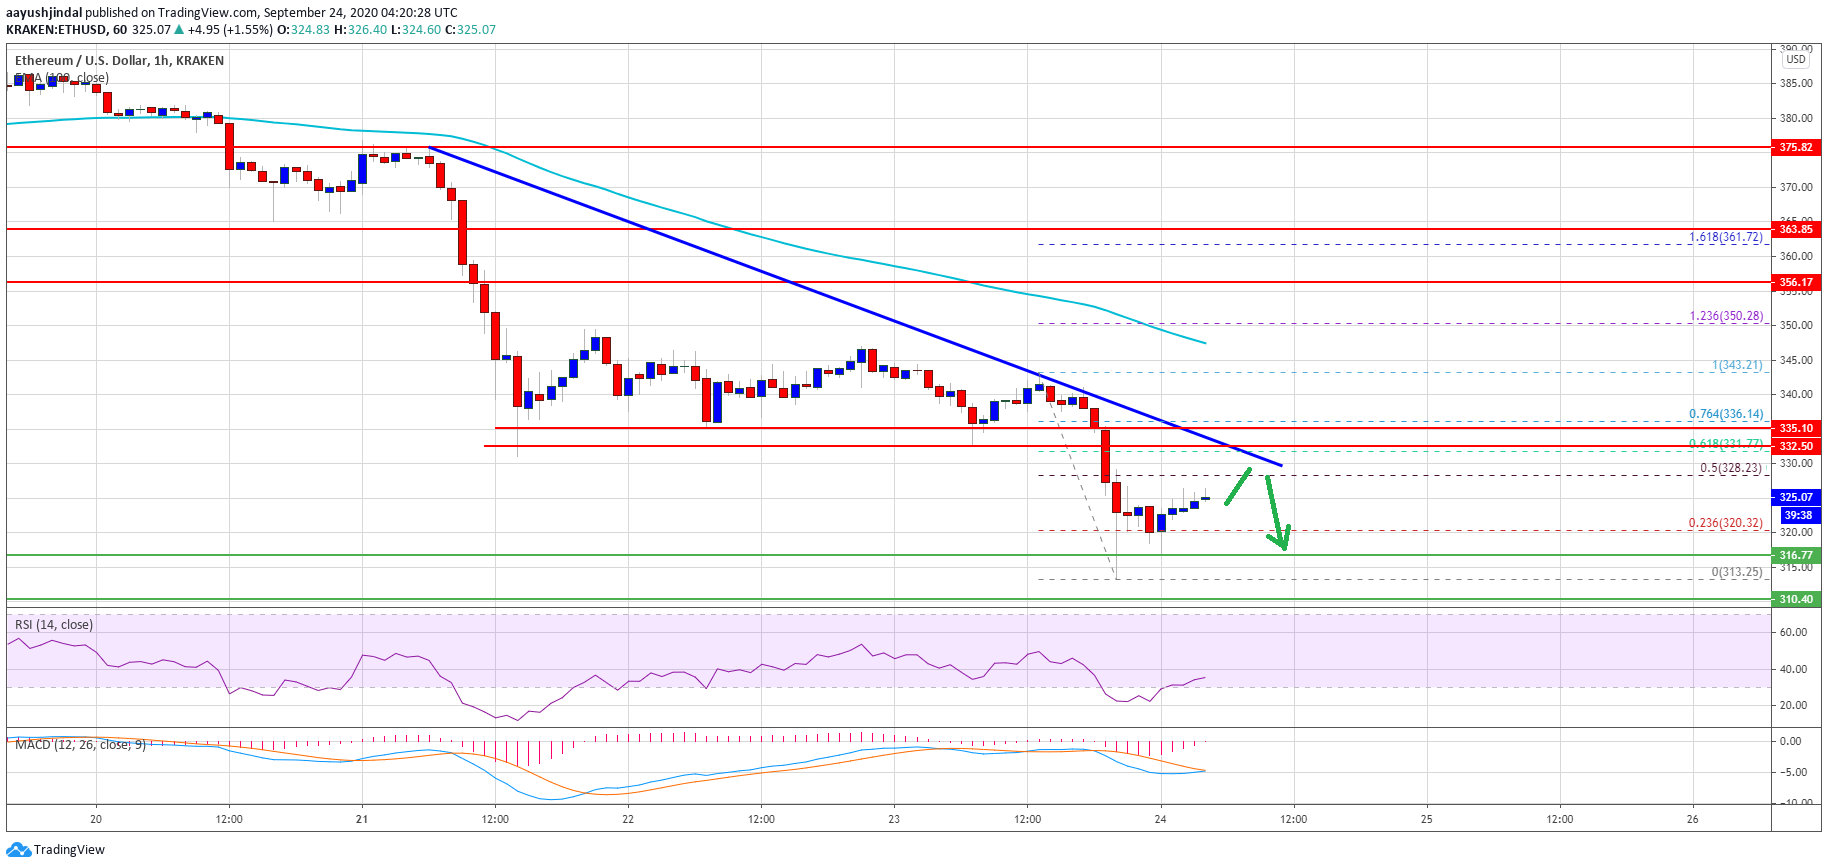 Ethereum Key Indicators Suggest A Strengthening Case For Correction Below $300